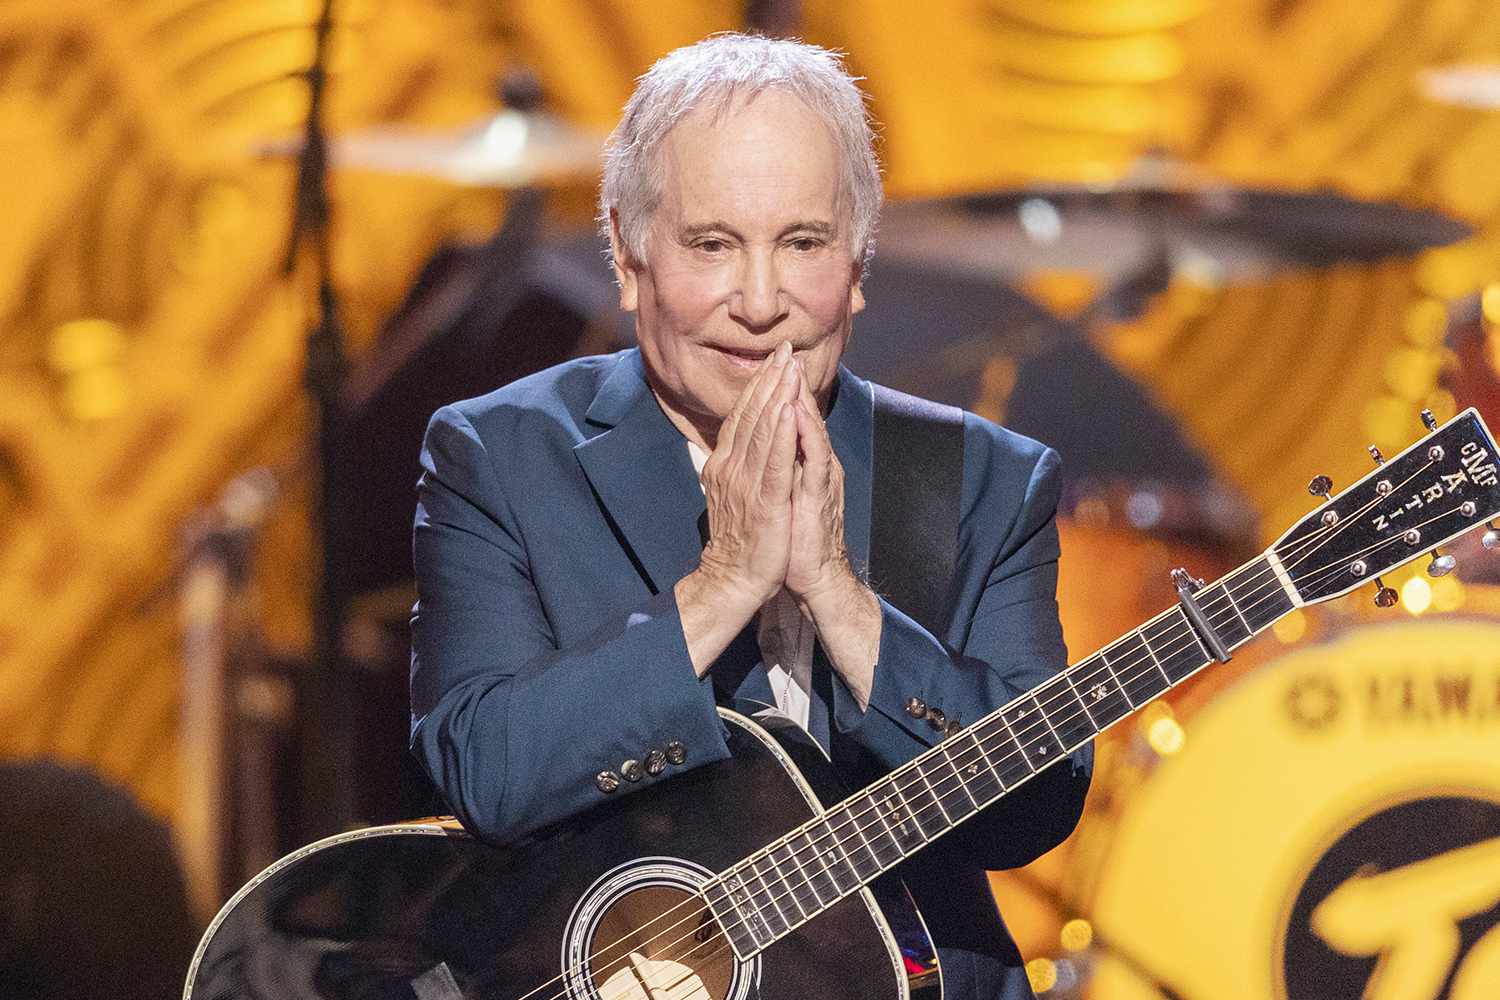 How Old Is Paul Simon, The Singer?